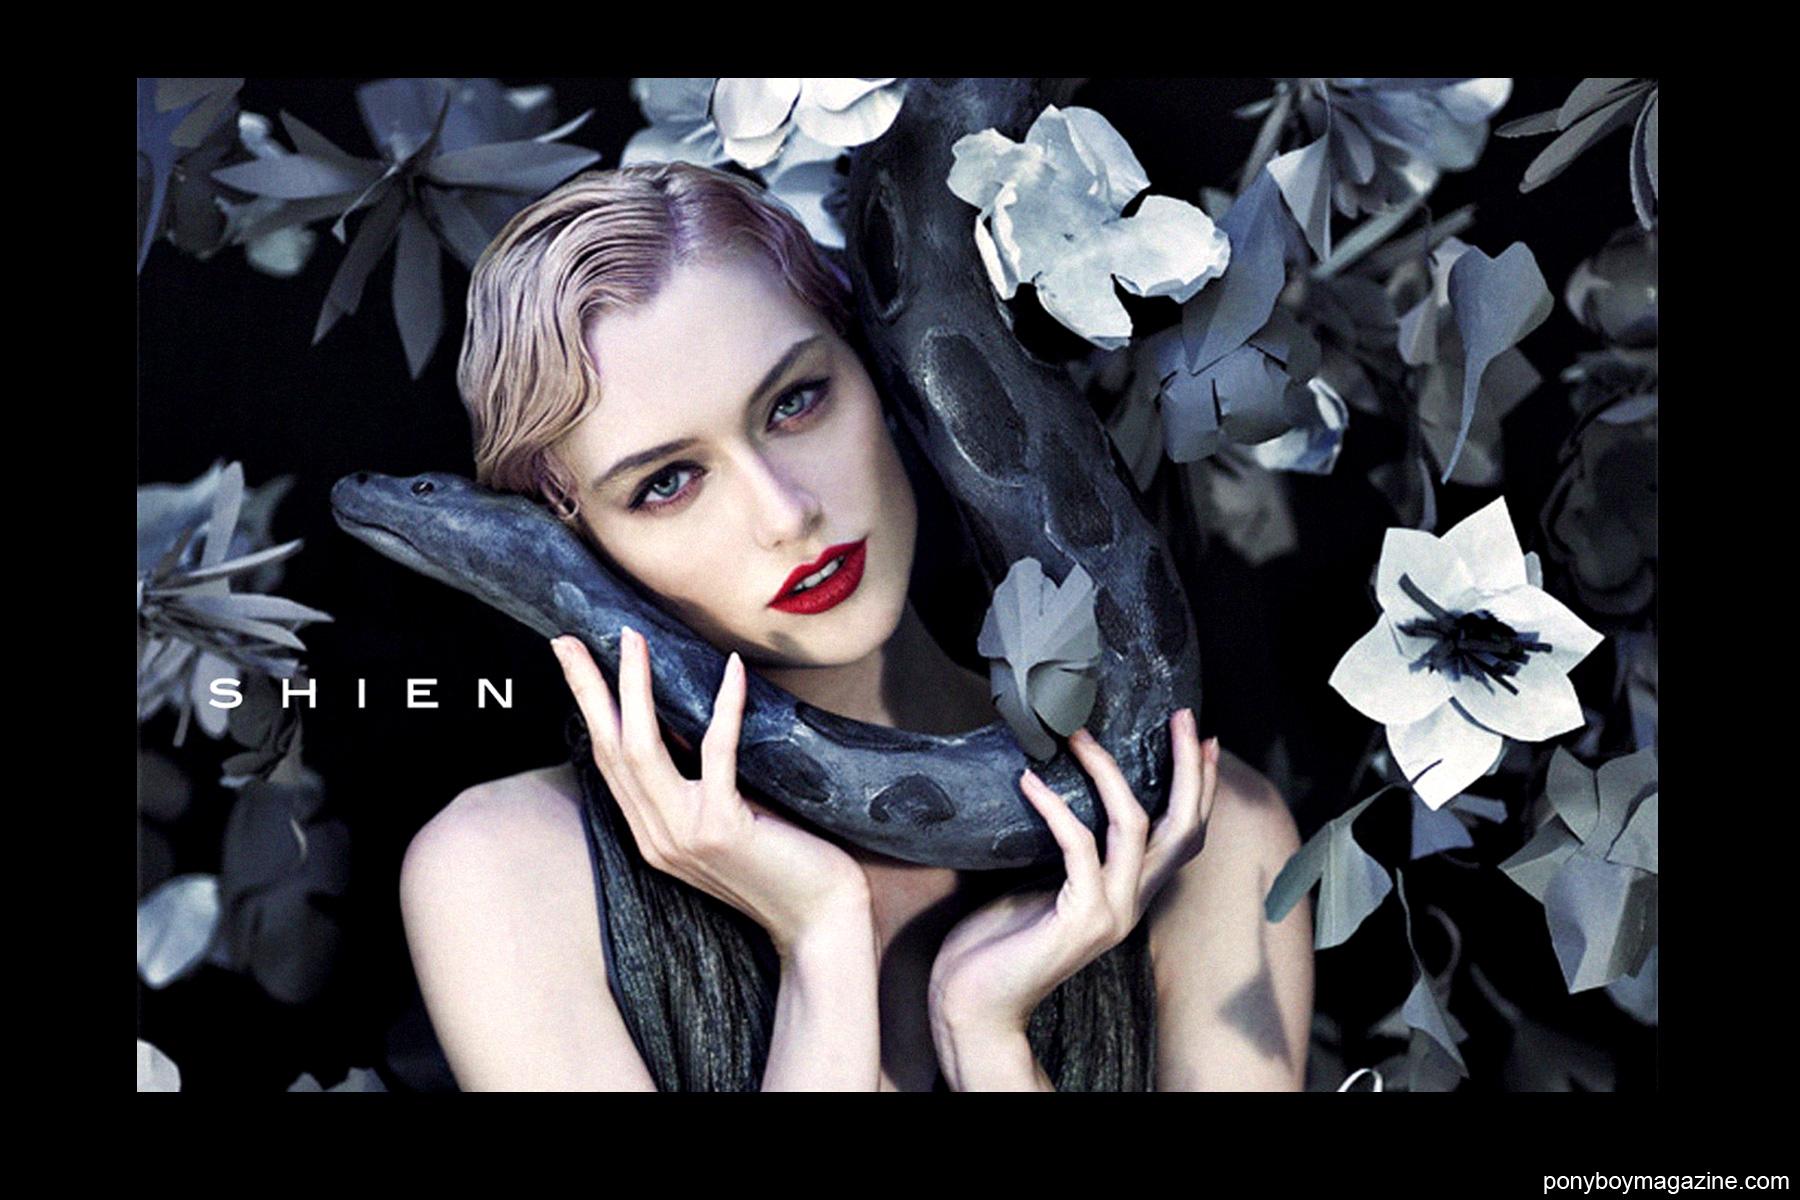 Ad for Shien Lee Cosmetics for Ponyboy Magazine.